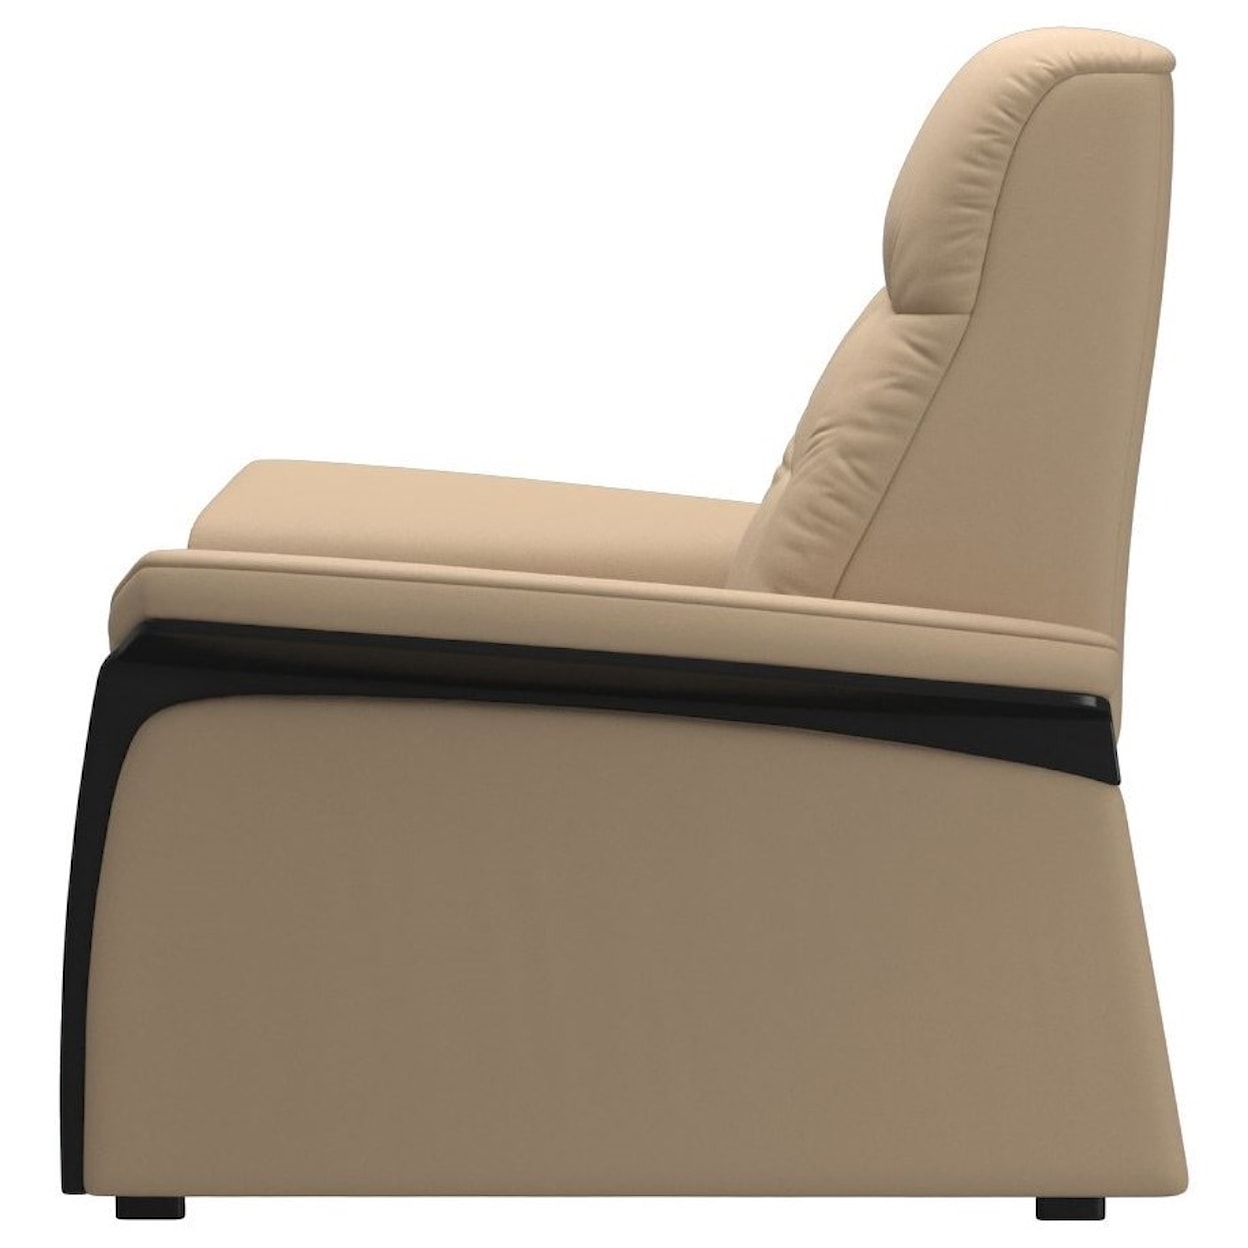 Stressless by Ekornes Mary Chair with Wood Arms